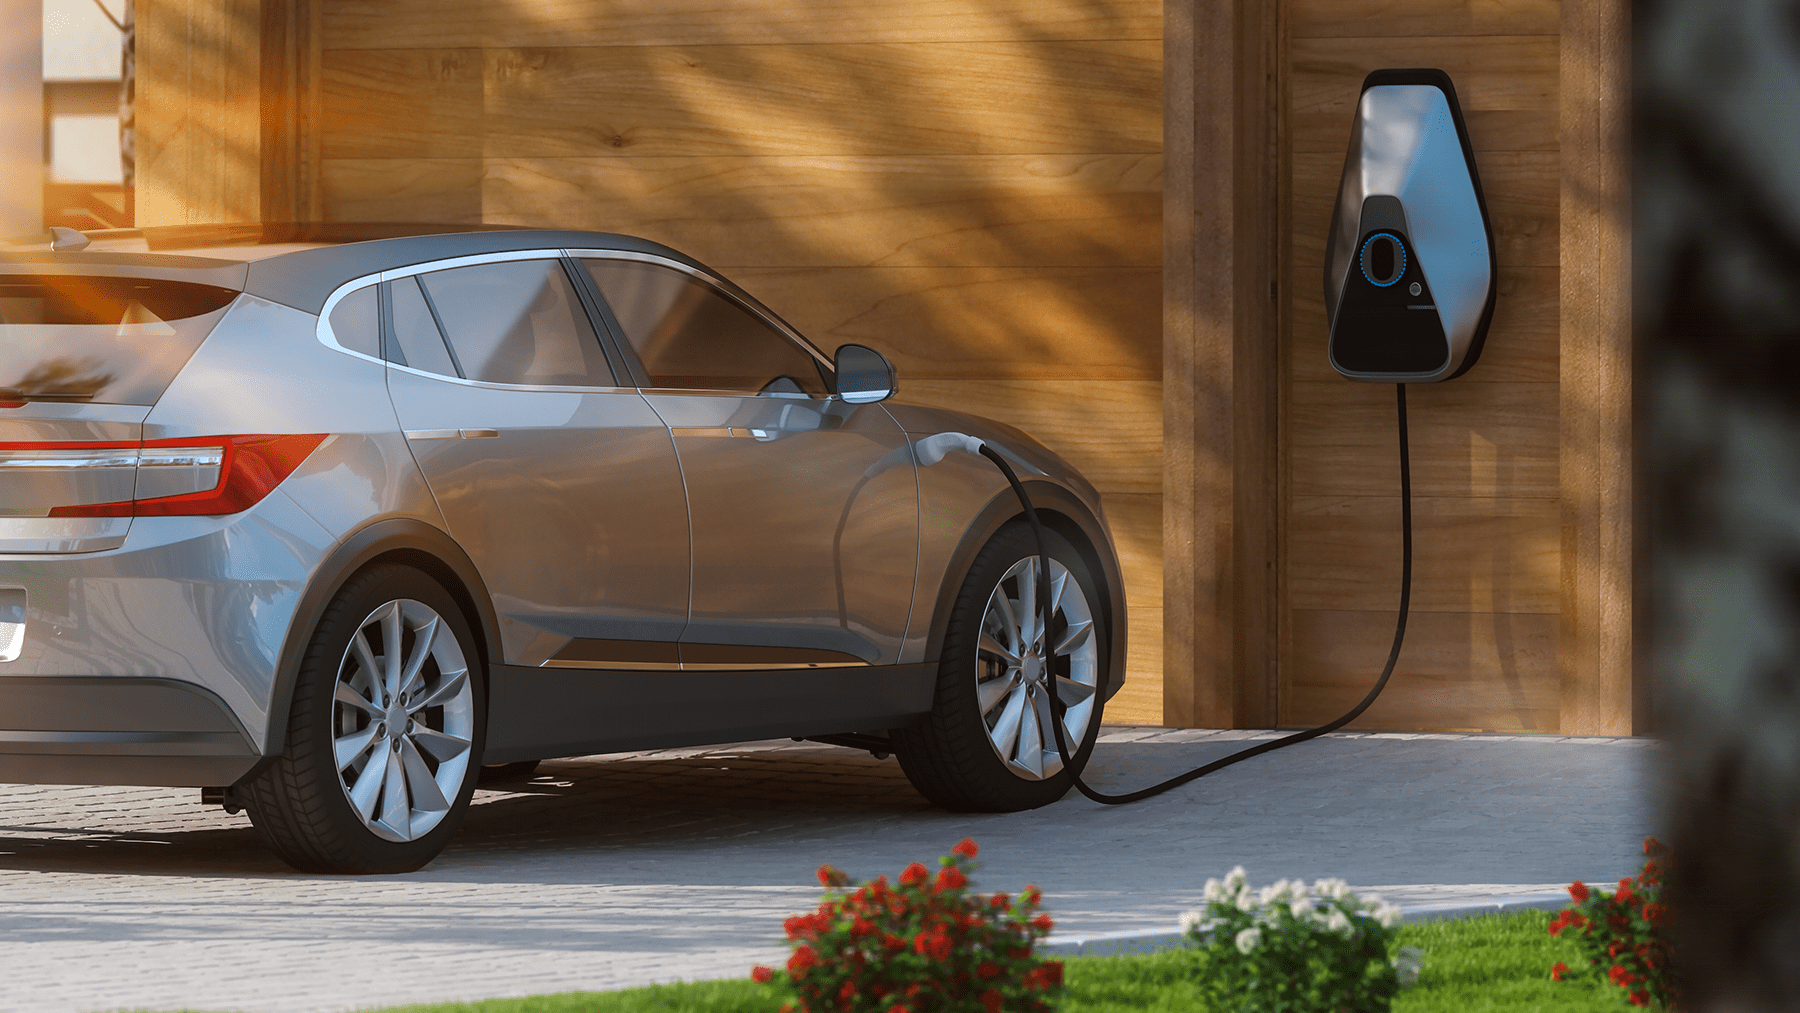 An electric car charging at home in the drive way.